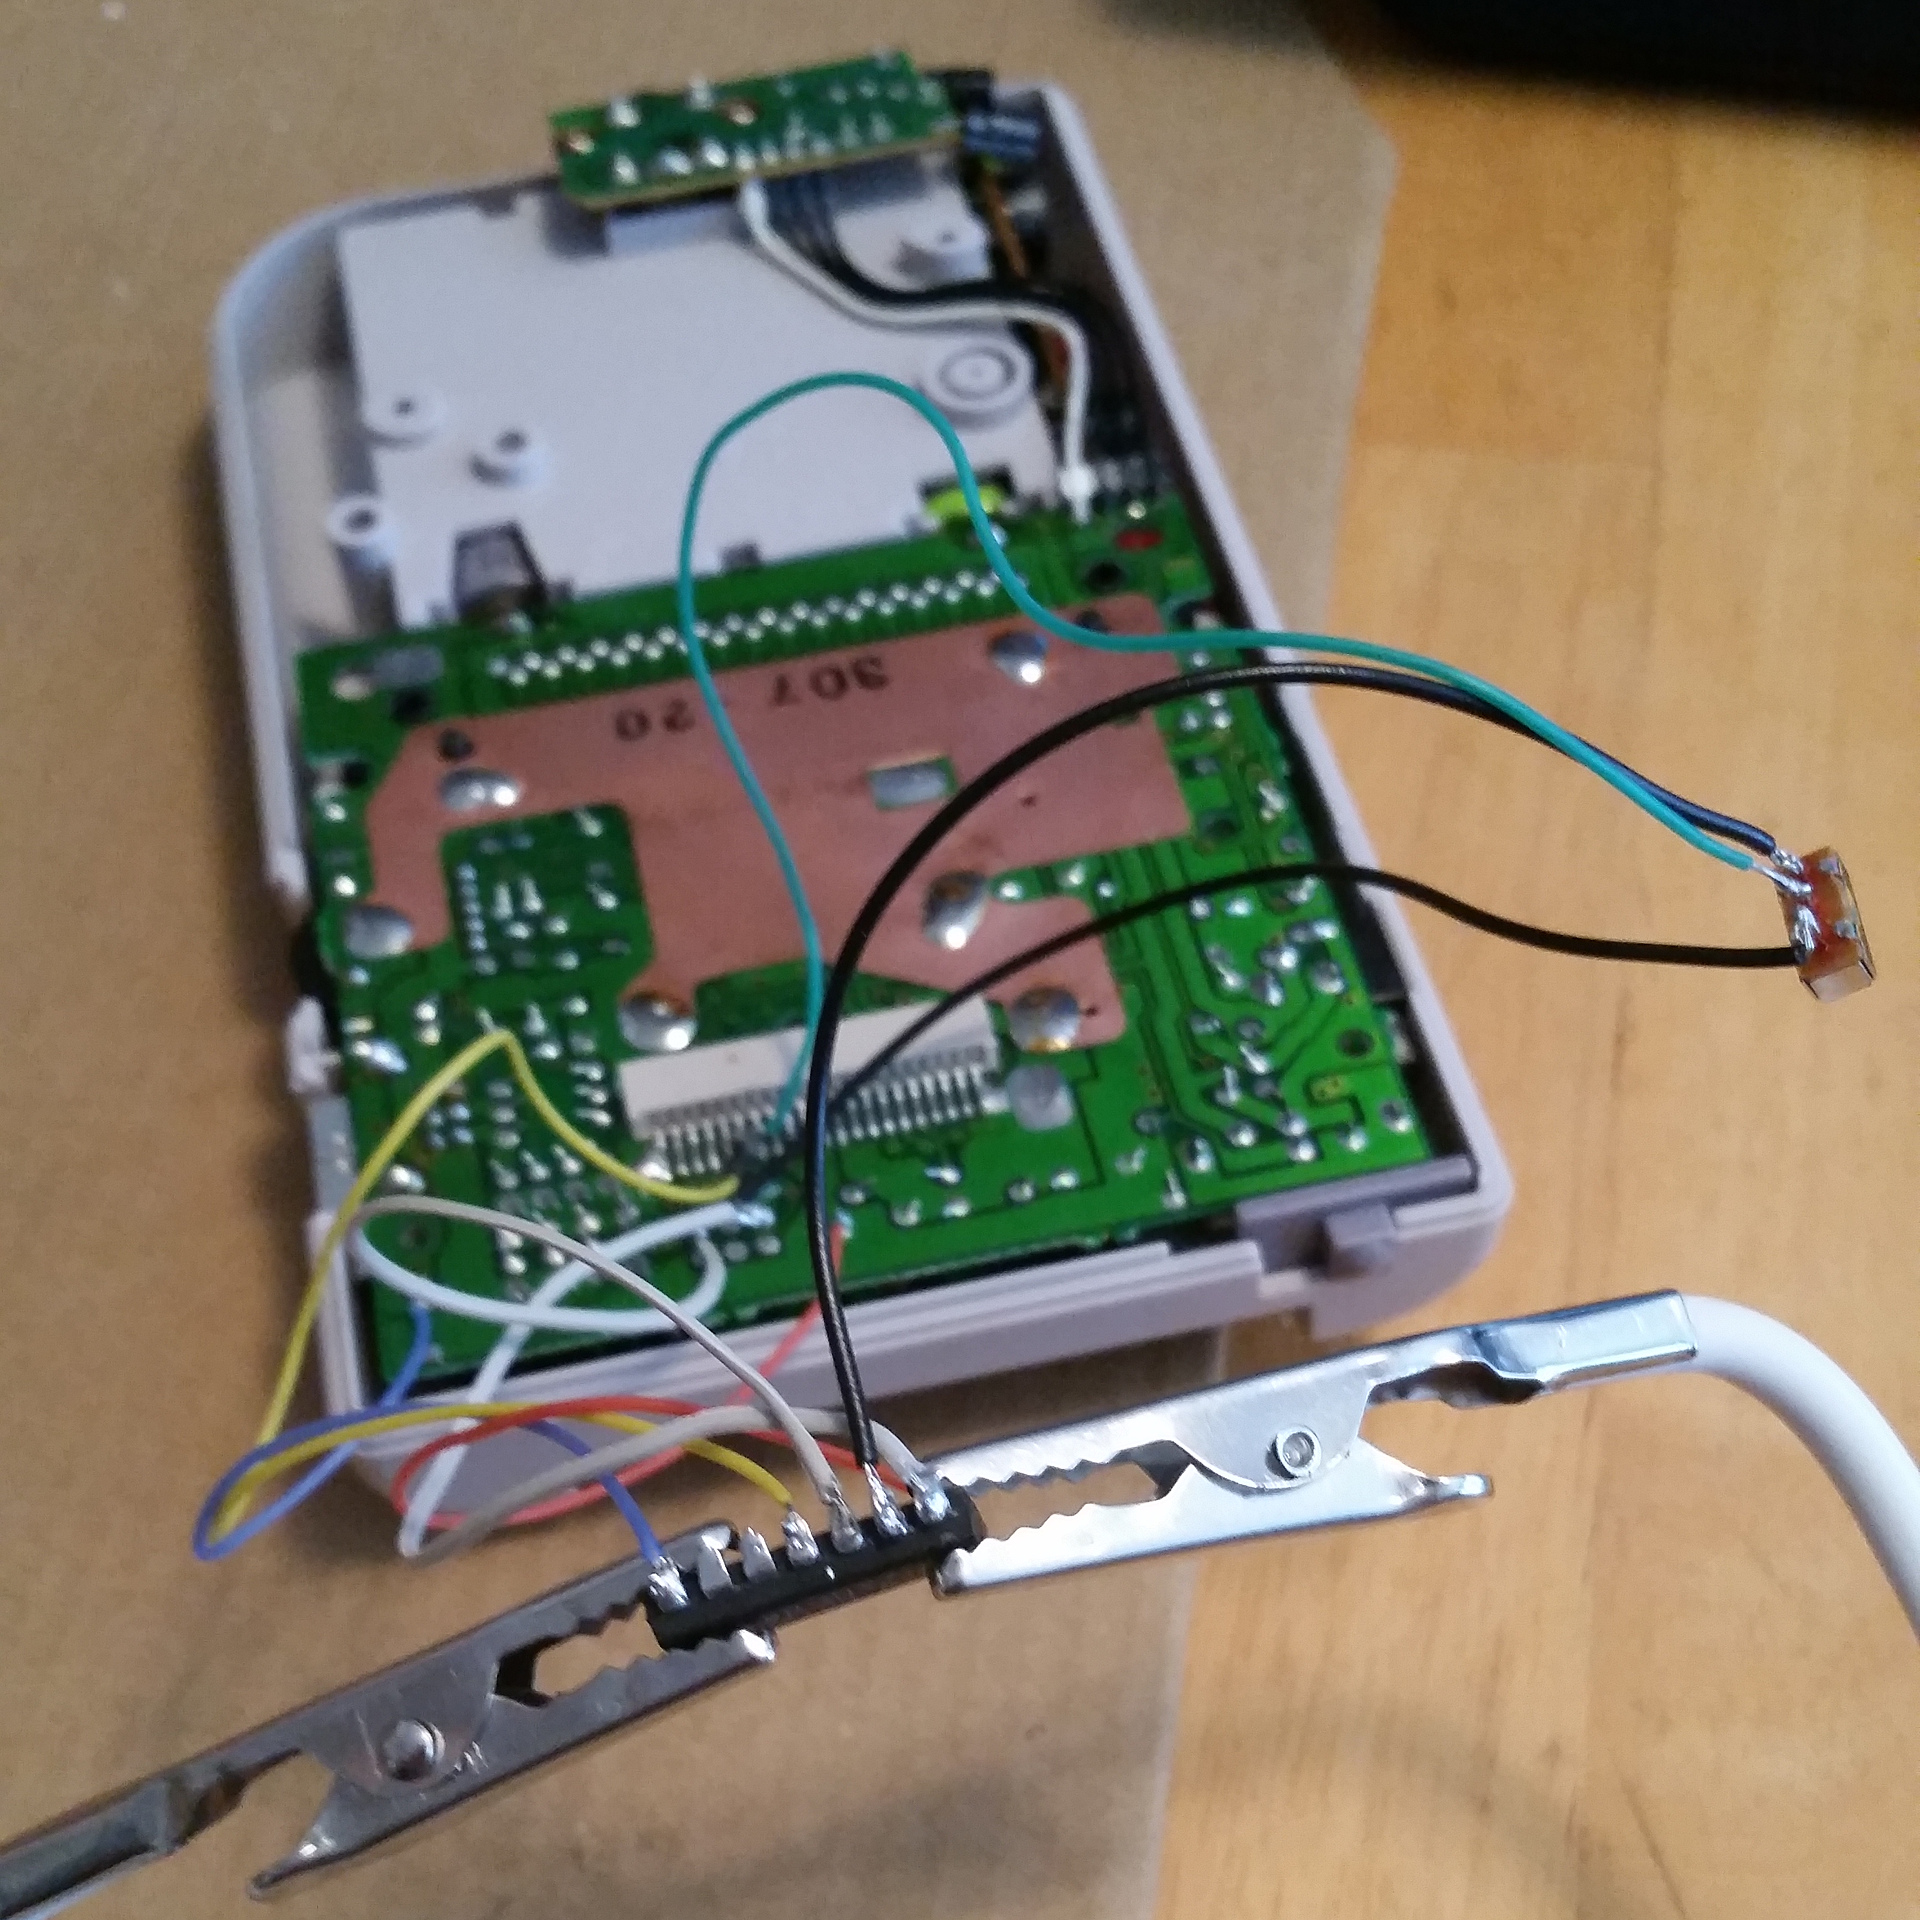 wire out the buttons of a gameboy dmg